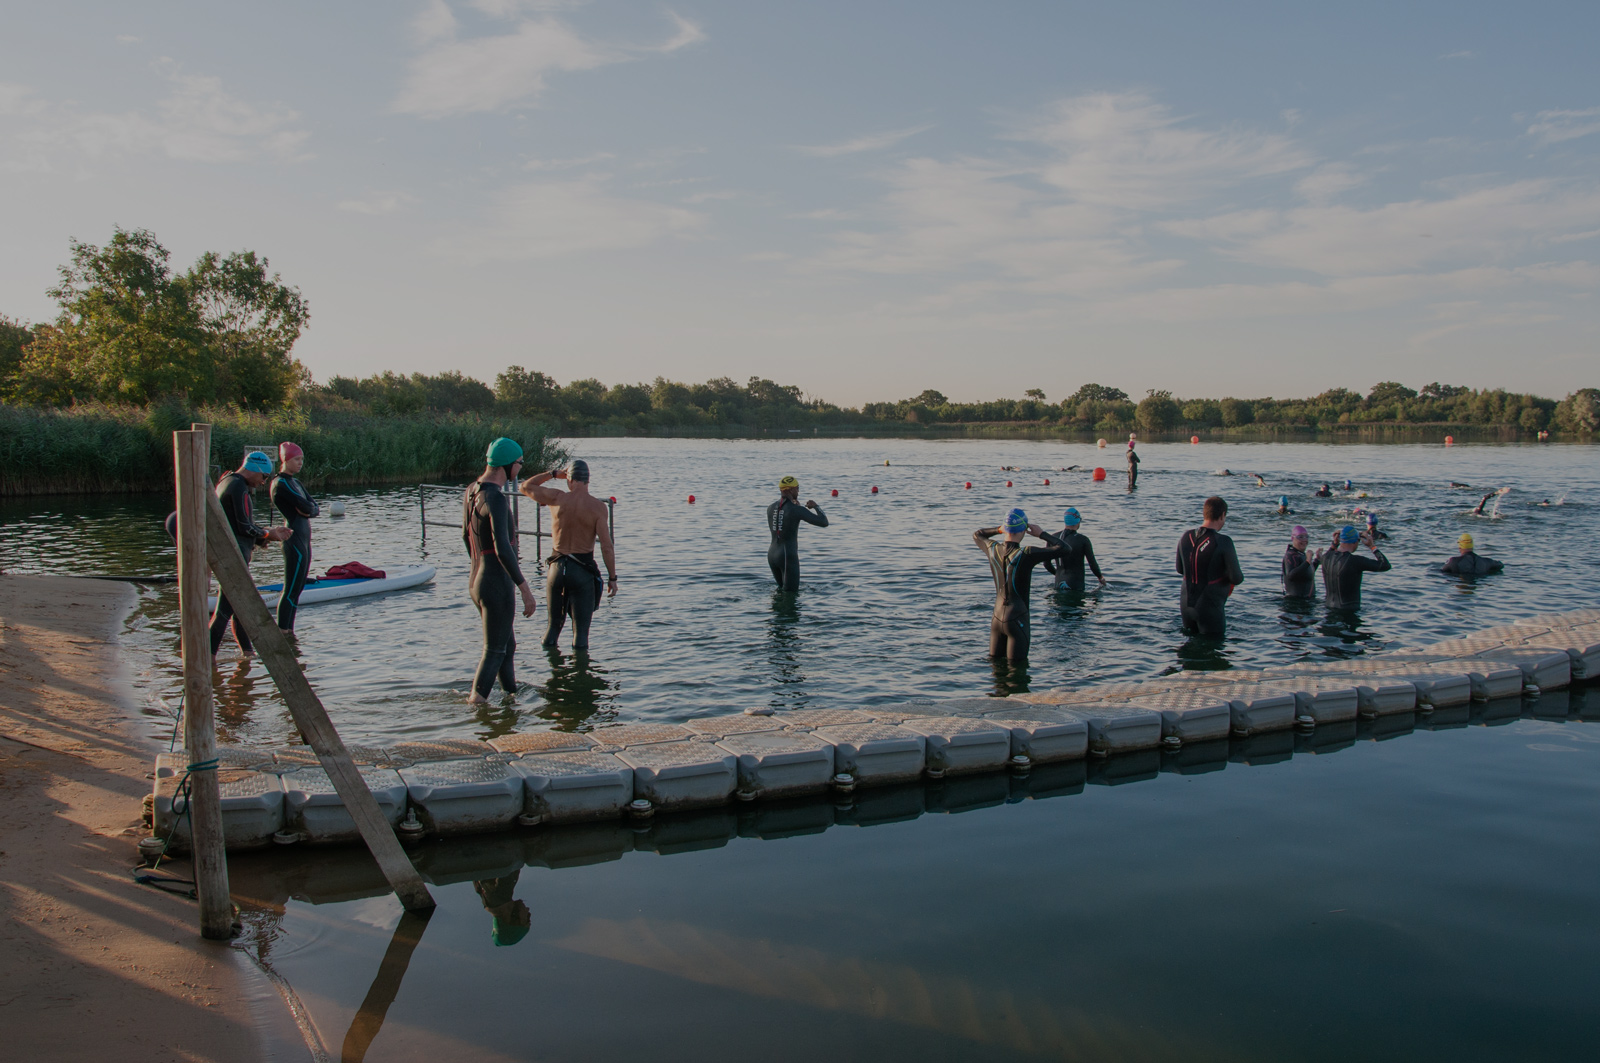 Swimmers entering the water at Stubbers Lake Essex